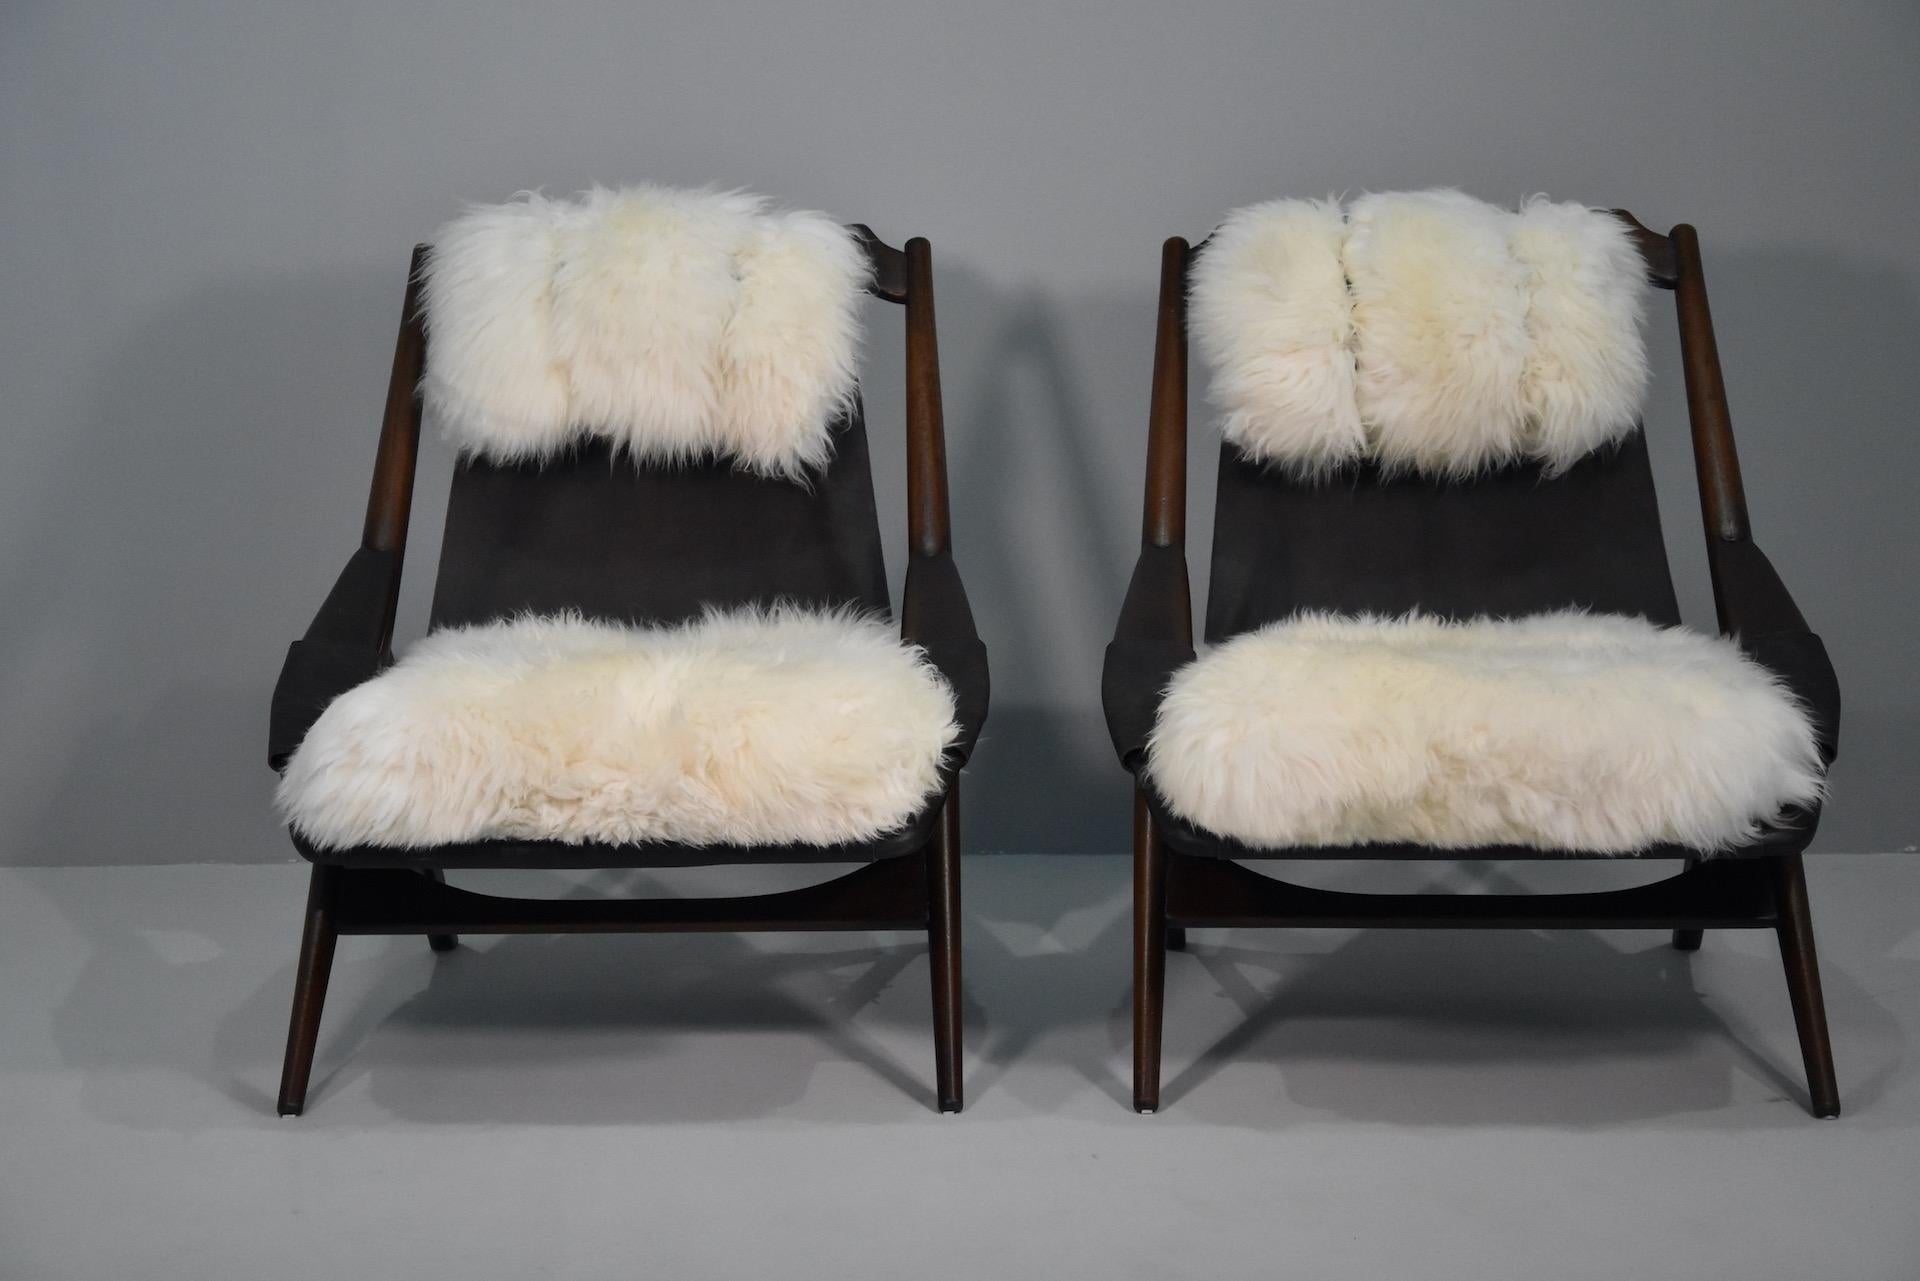 20th Century W.D. Andersag Lounge Chair in Leather And Sheepskin For Sale